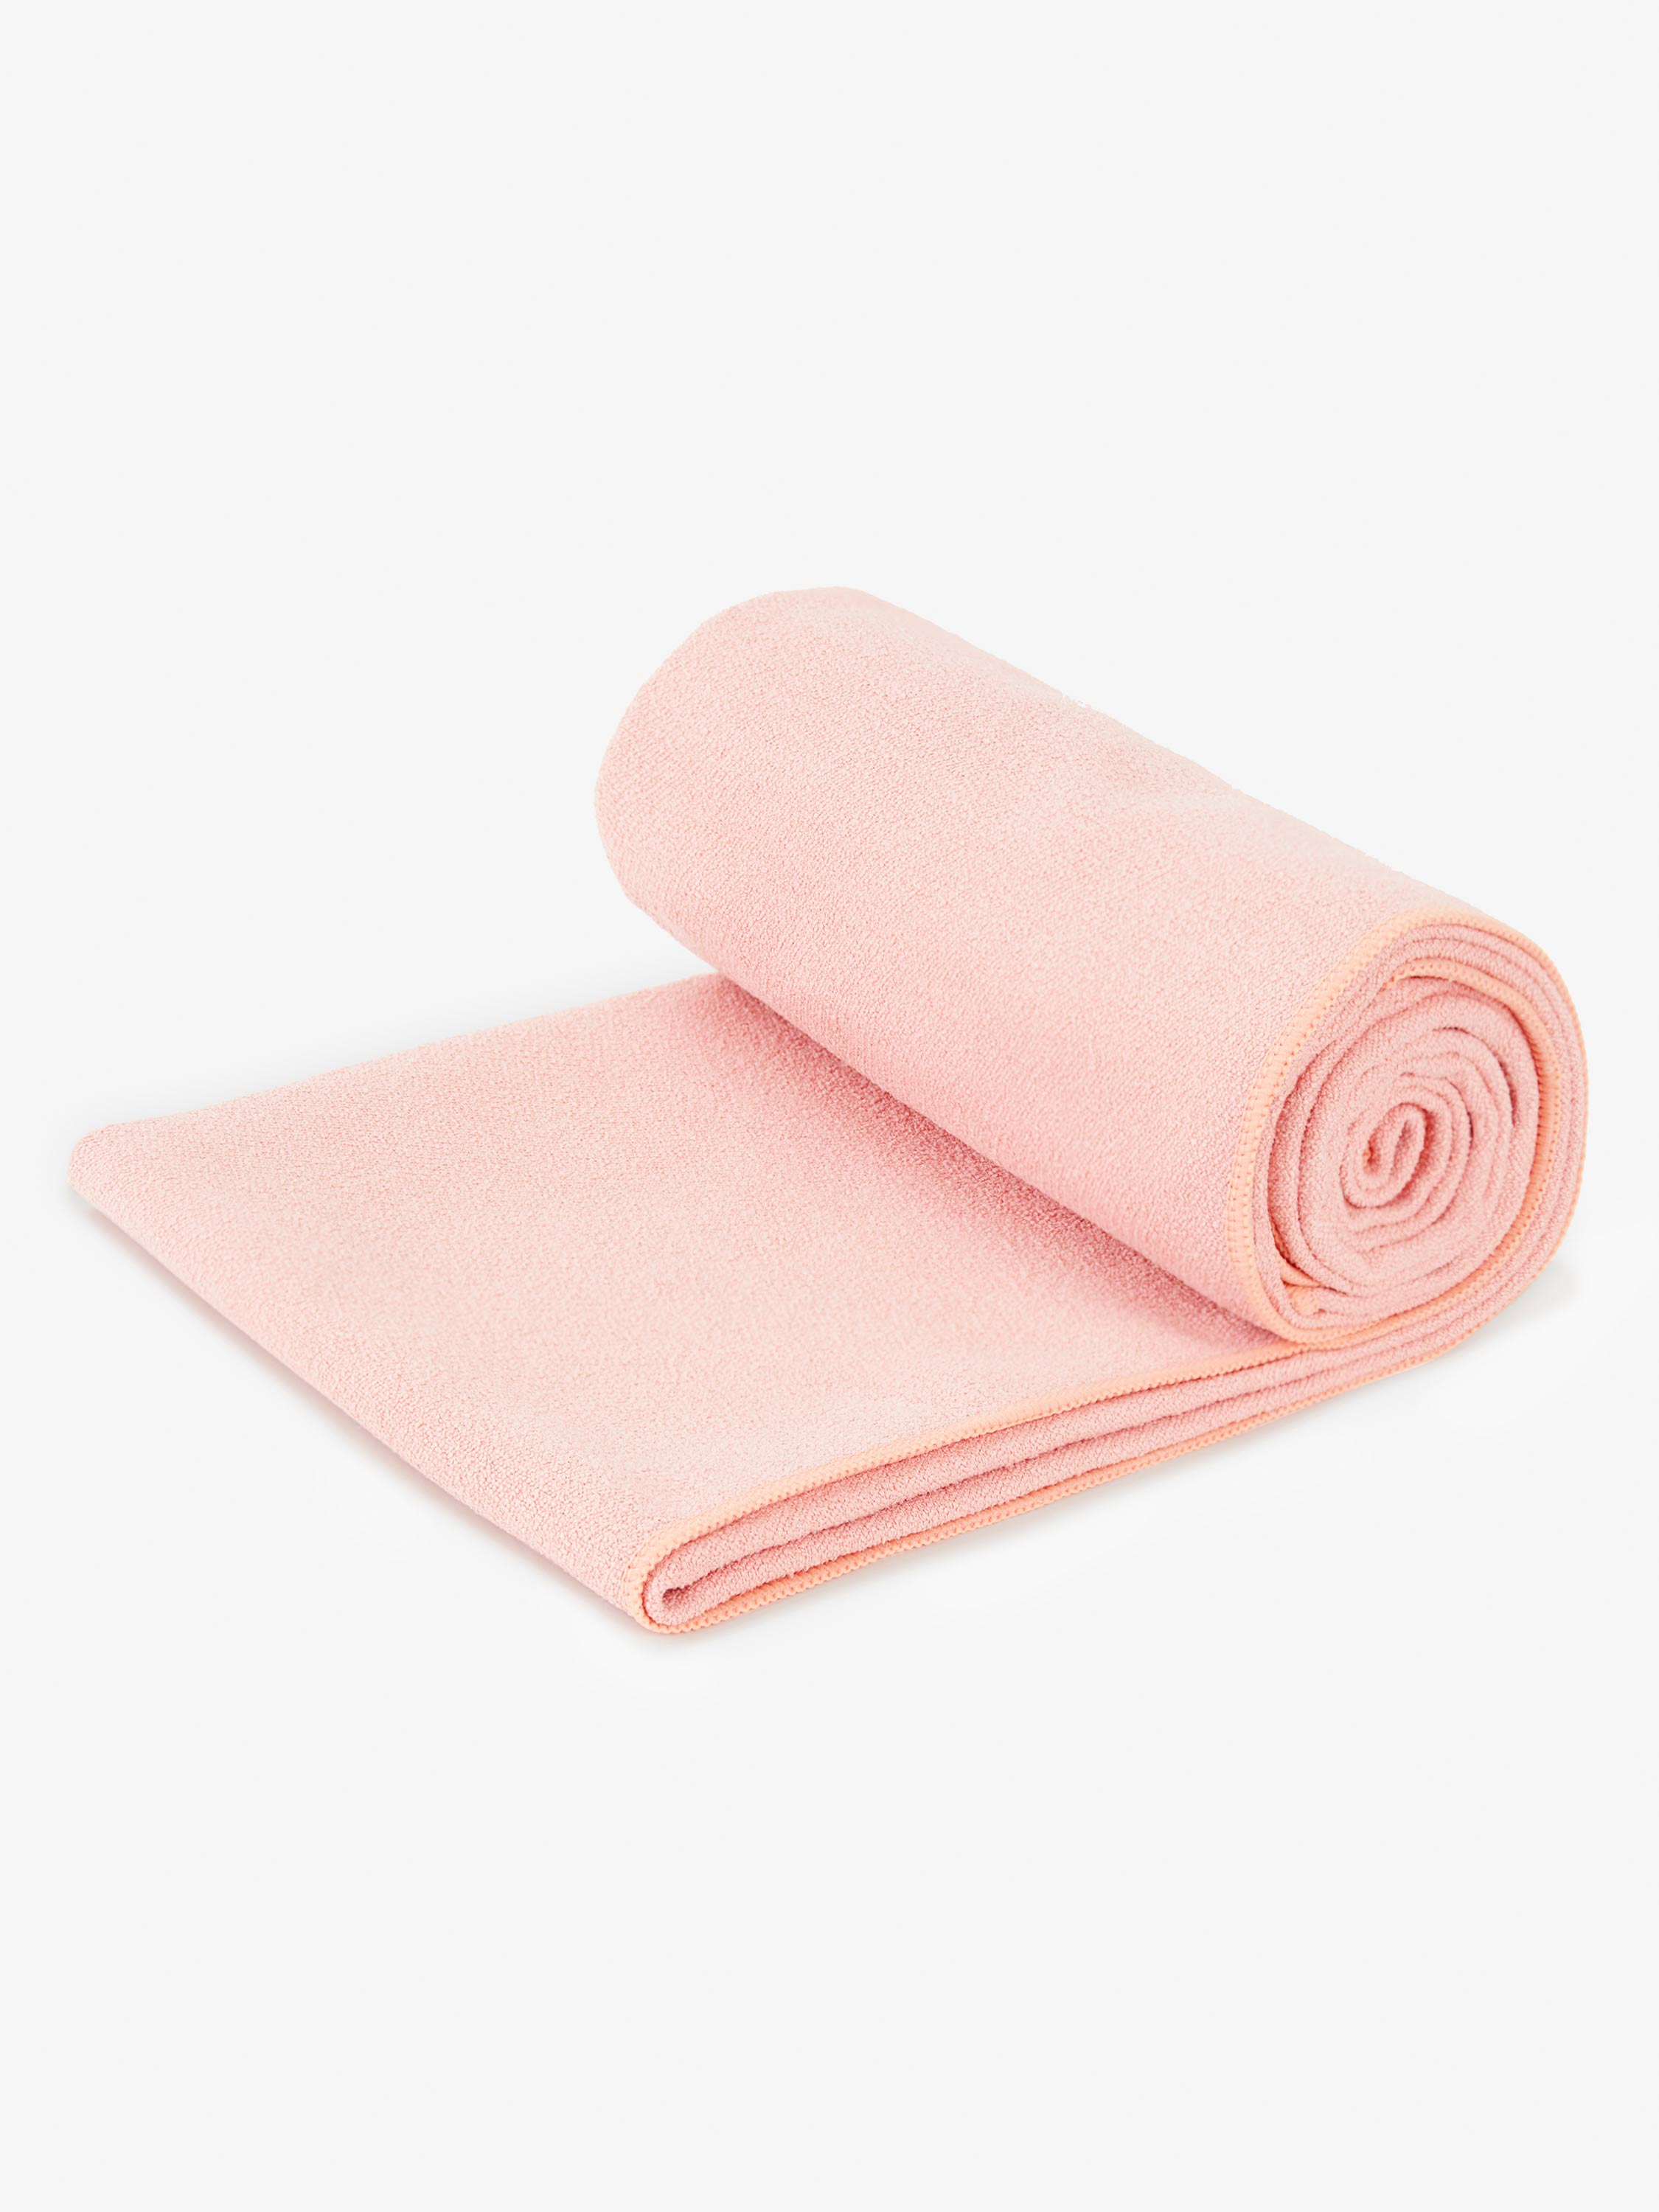 Best Selling 12 Colors Quick Dry Yoga Towel Mate Manufacturer